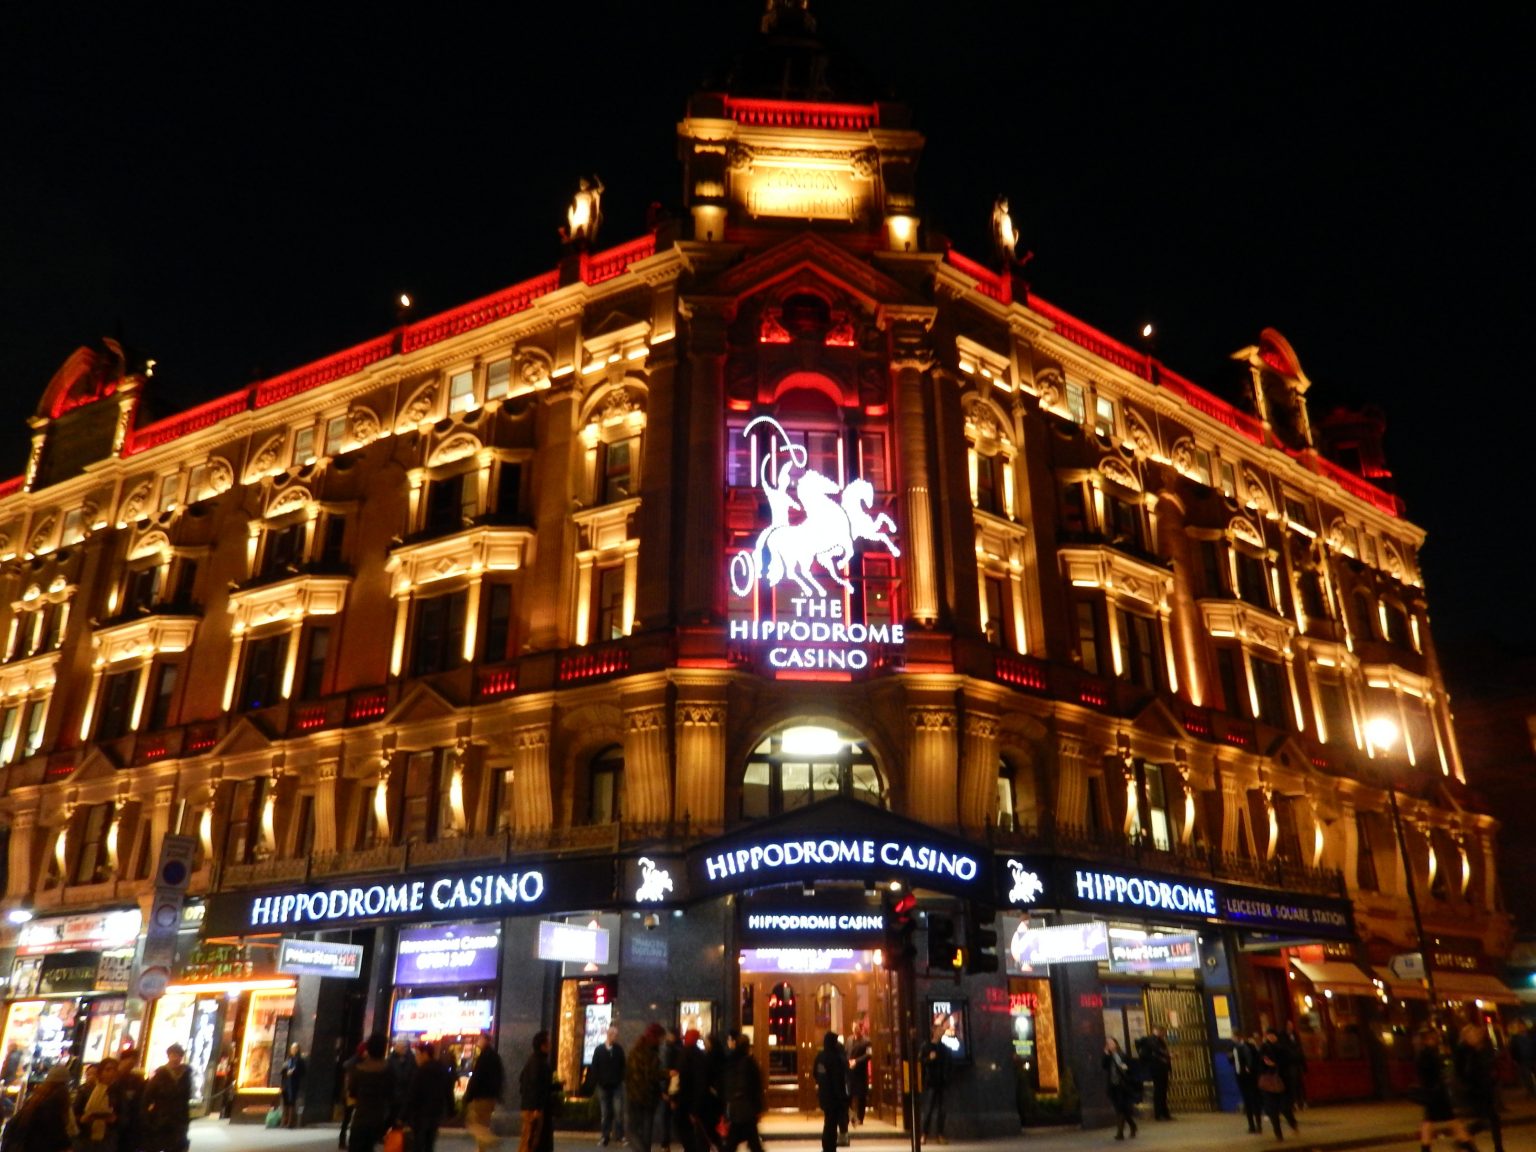 London’s Hippodrome Casino Opposes Vaccine Passports, Proof of Health Not Required